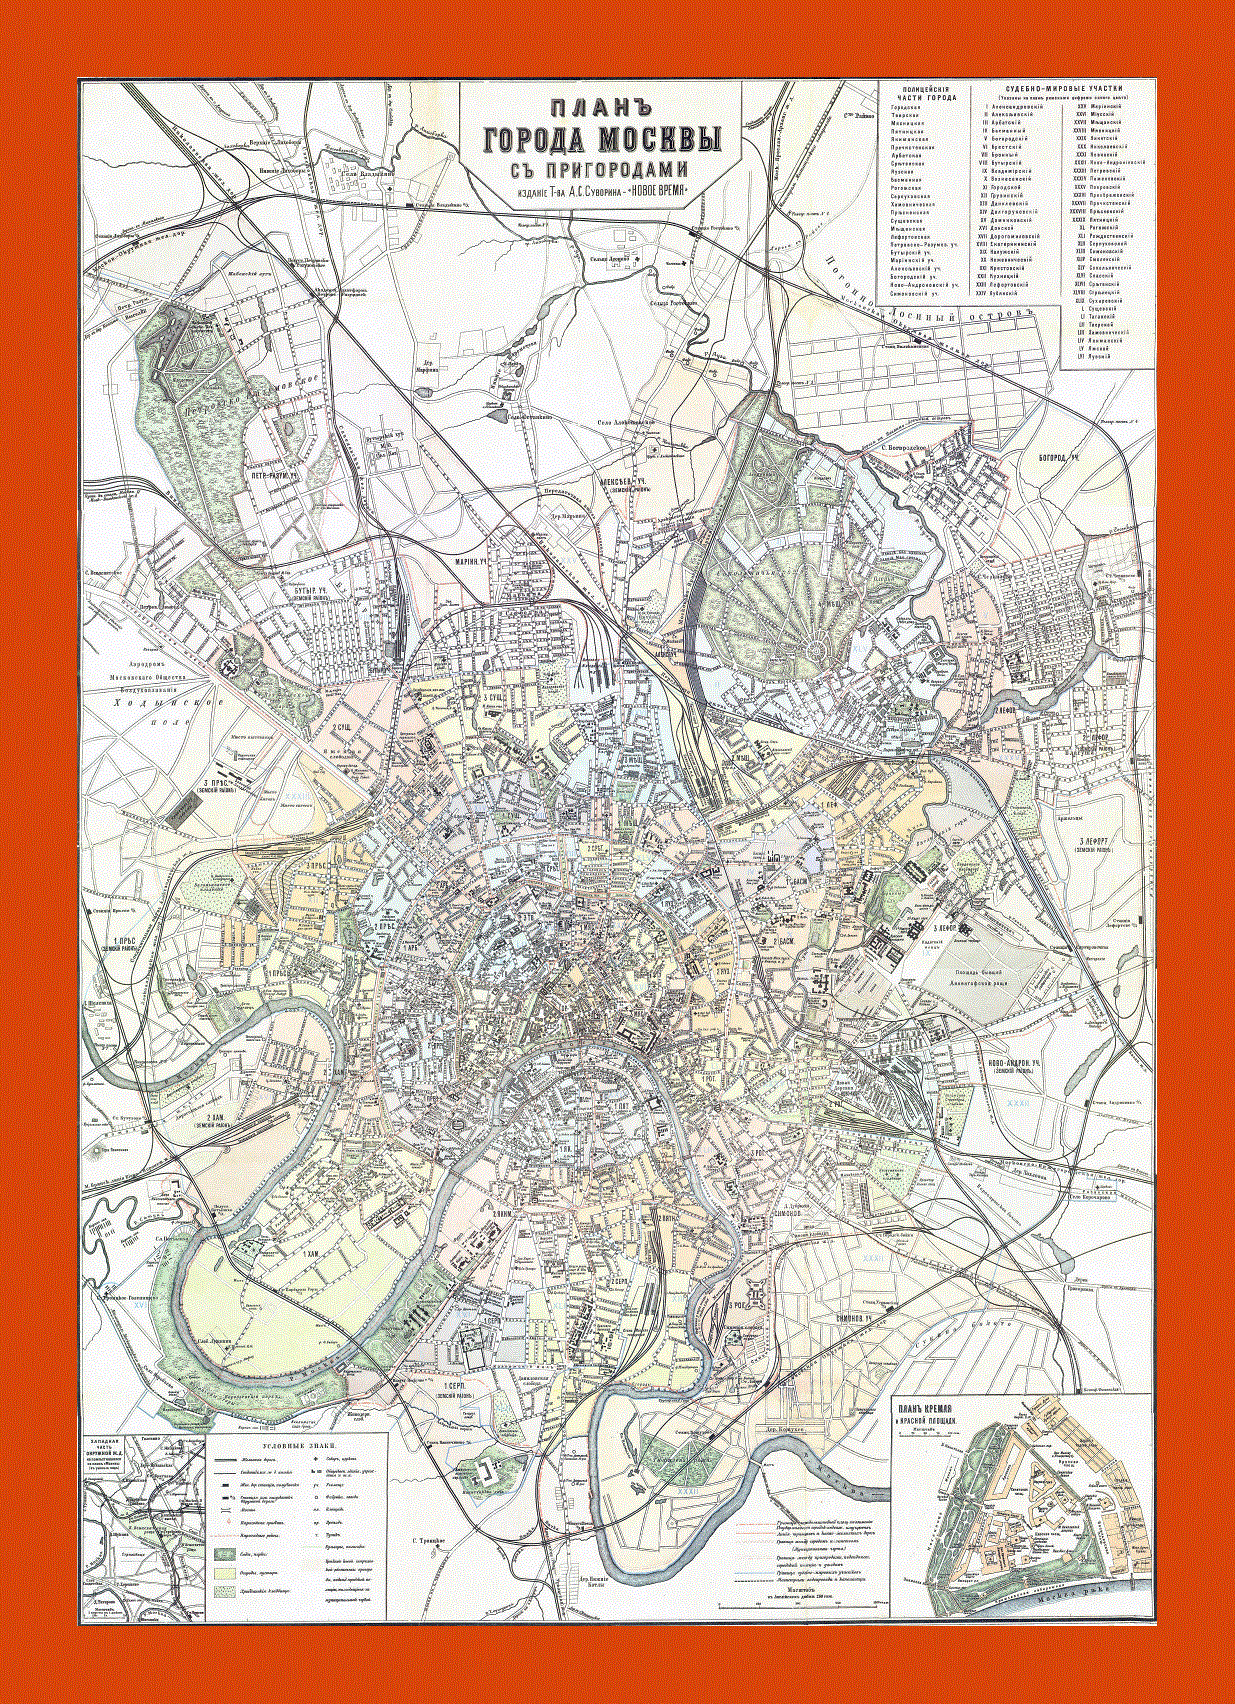 Old map of Moscow city - 1907